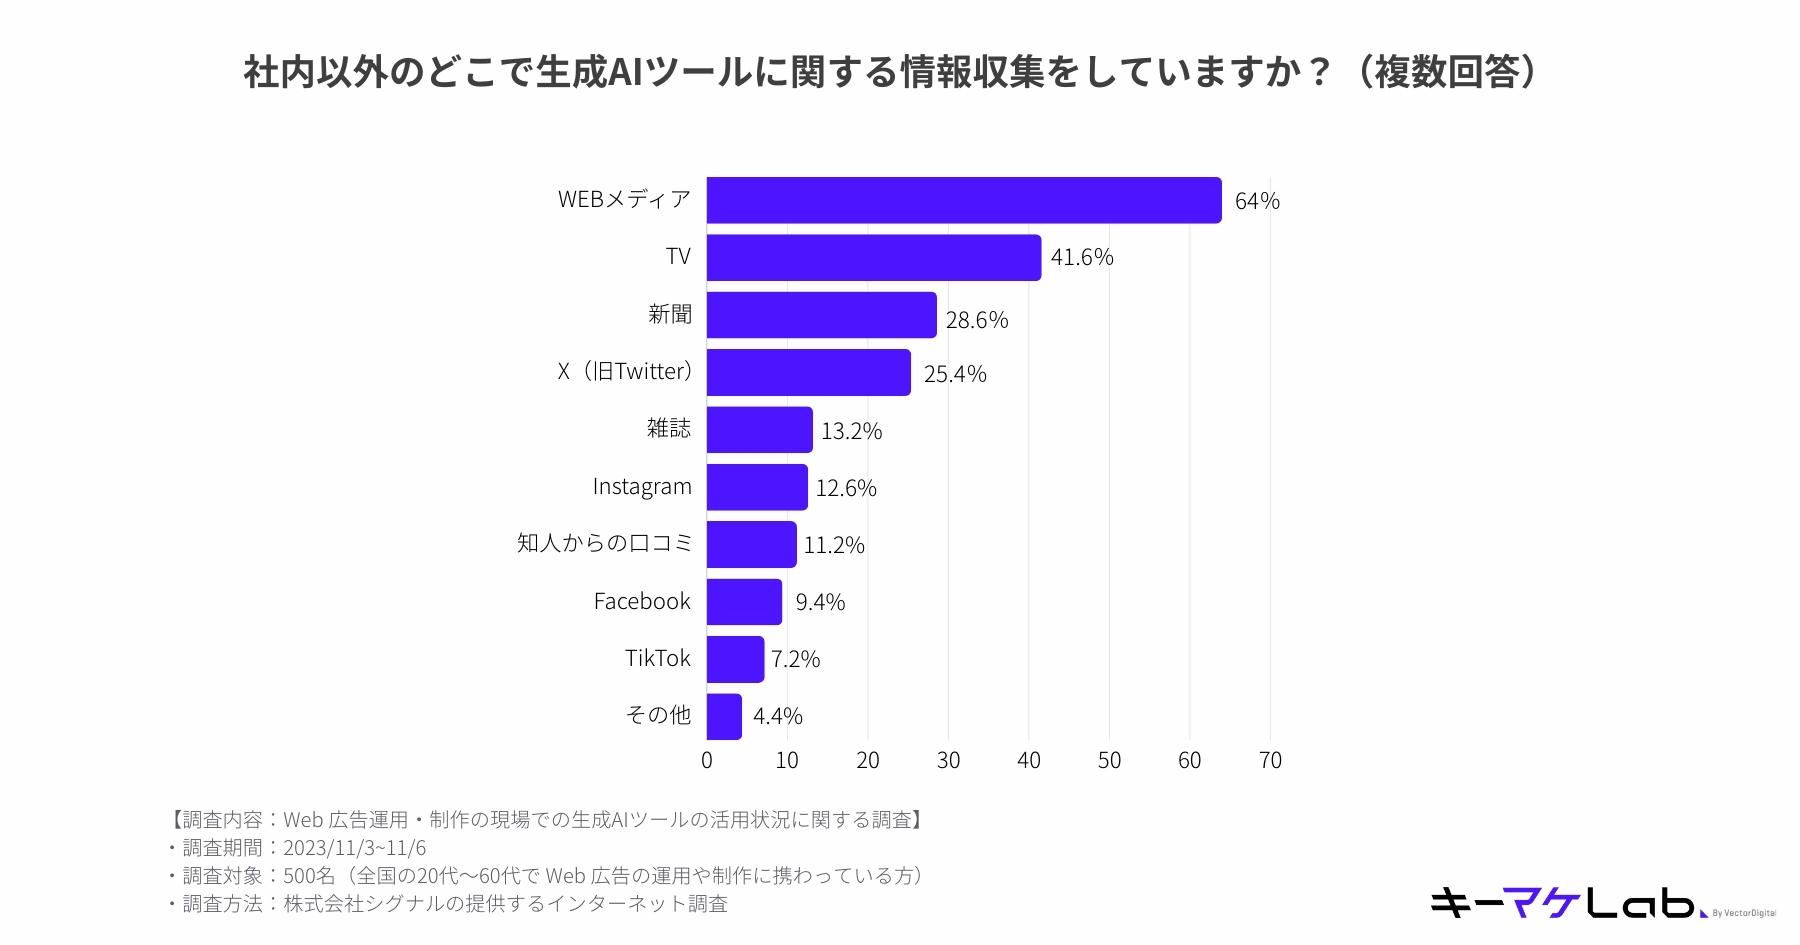 When asked, ``Where do you collect information about generated AI tools outside of your company?'', ``Web media'' was the most popular answer at 64%. The runner-up was "TV" at 41.6%, followed by newspapers at 28.6%.